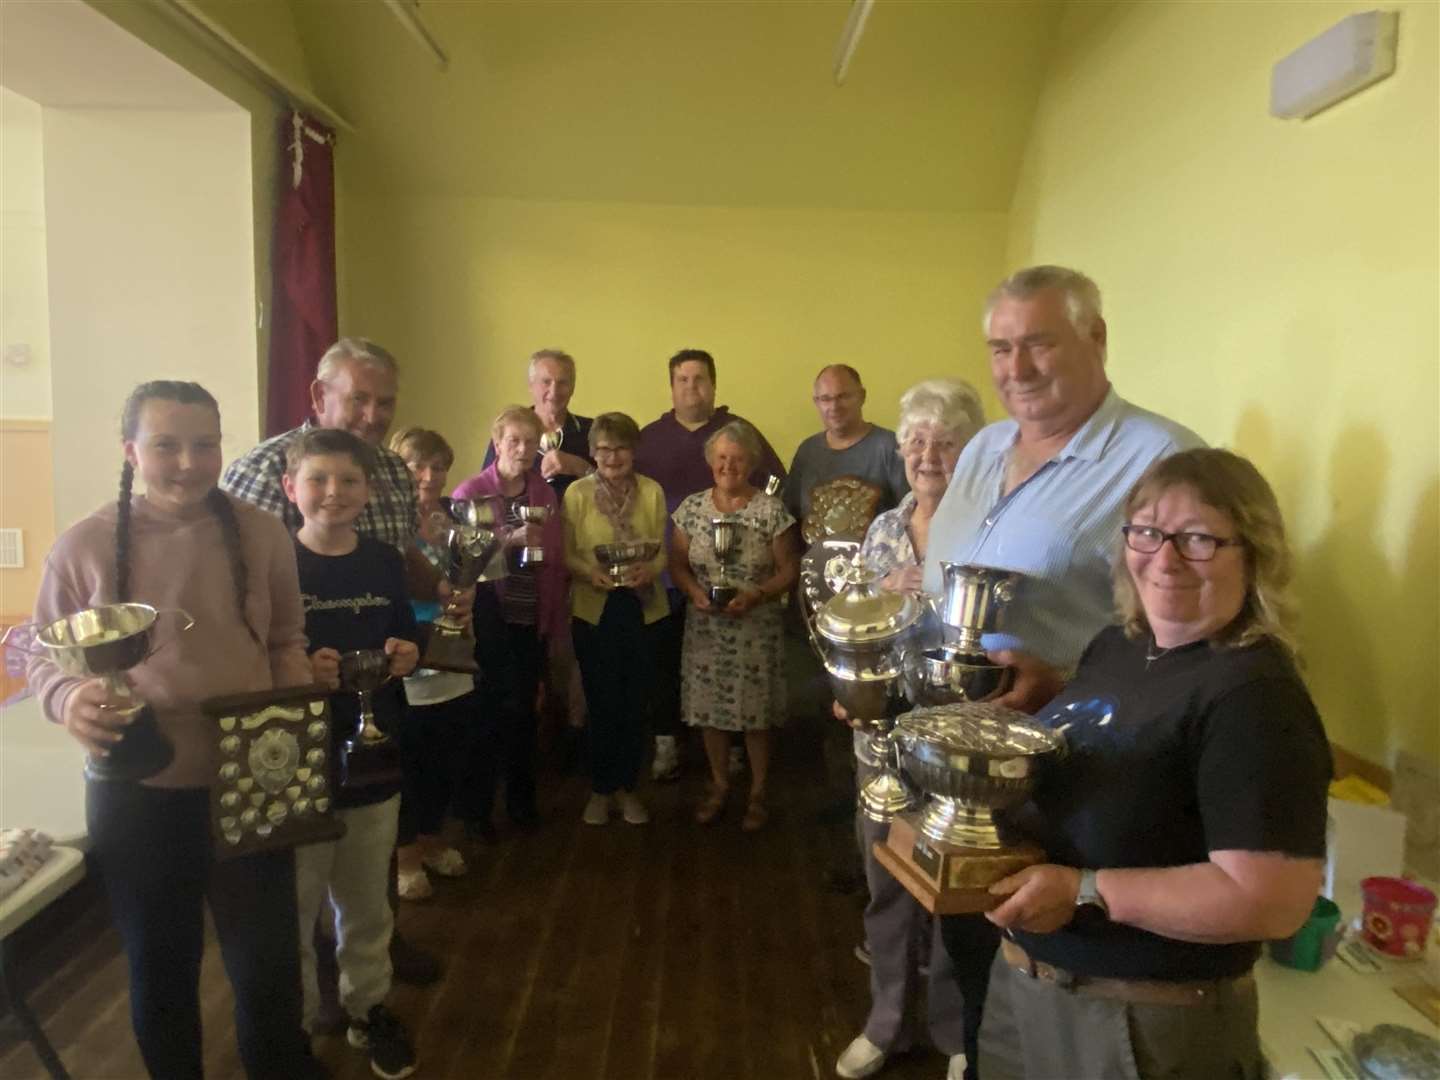 Rhona Lewis (right) and Alan Morrison (second right) show off their Rose Bowl and Baldwin Cup trophies respectively, after being presented with them by Mary Jesson (third right). They are joined by other prizewinners. Picture: HNM